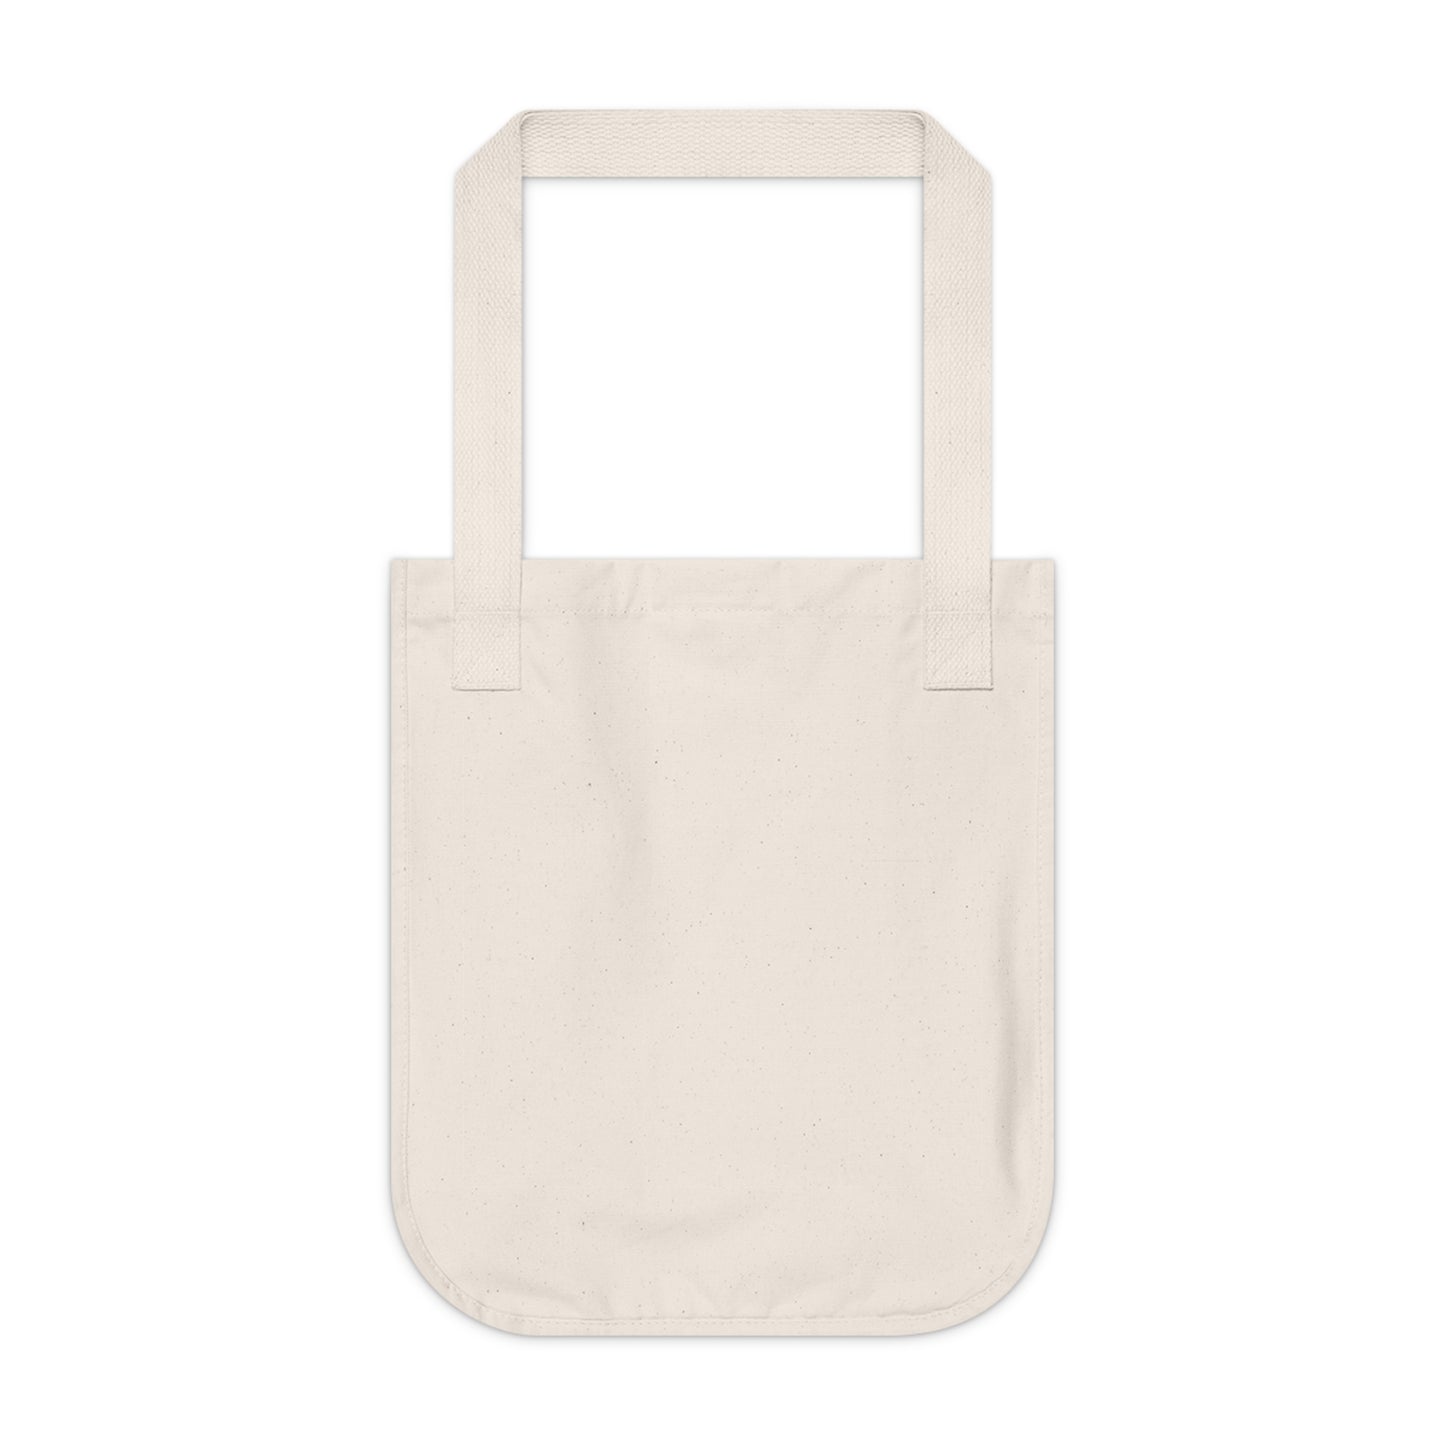 There Is No Planet B Tote Bag